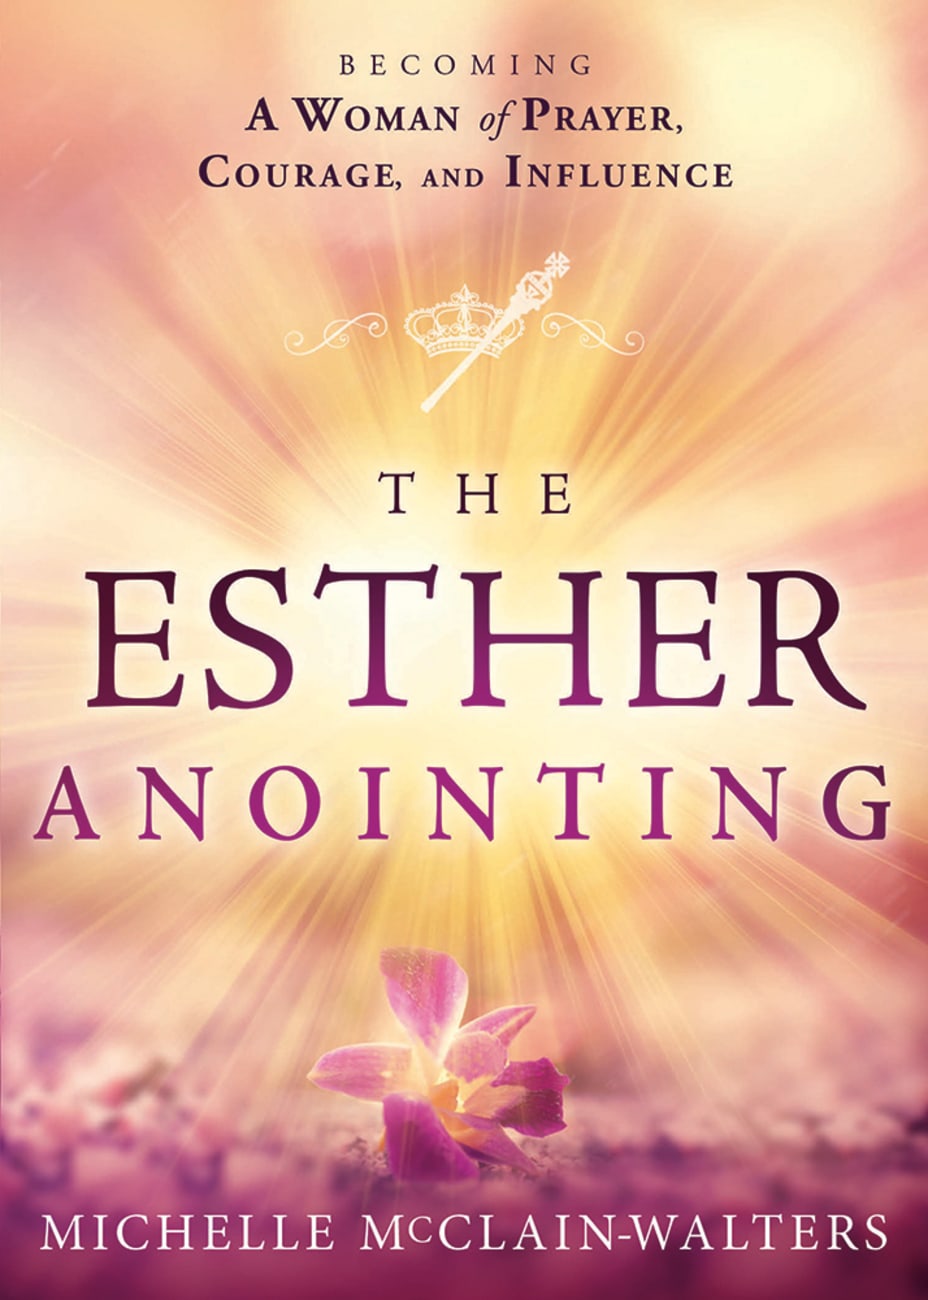 The Esther Anointing: Activating Your Divine Gifts to Make a Difference Paperback